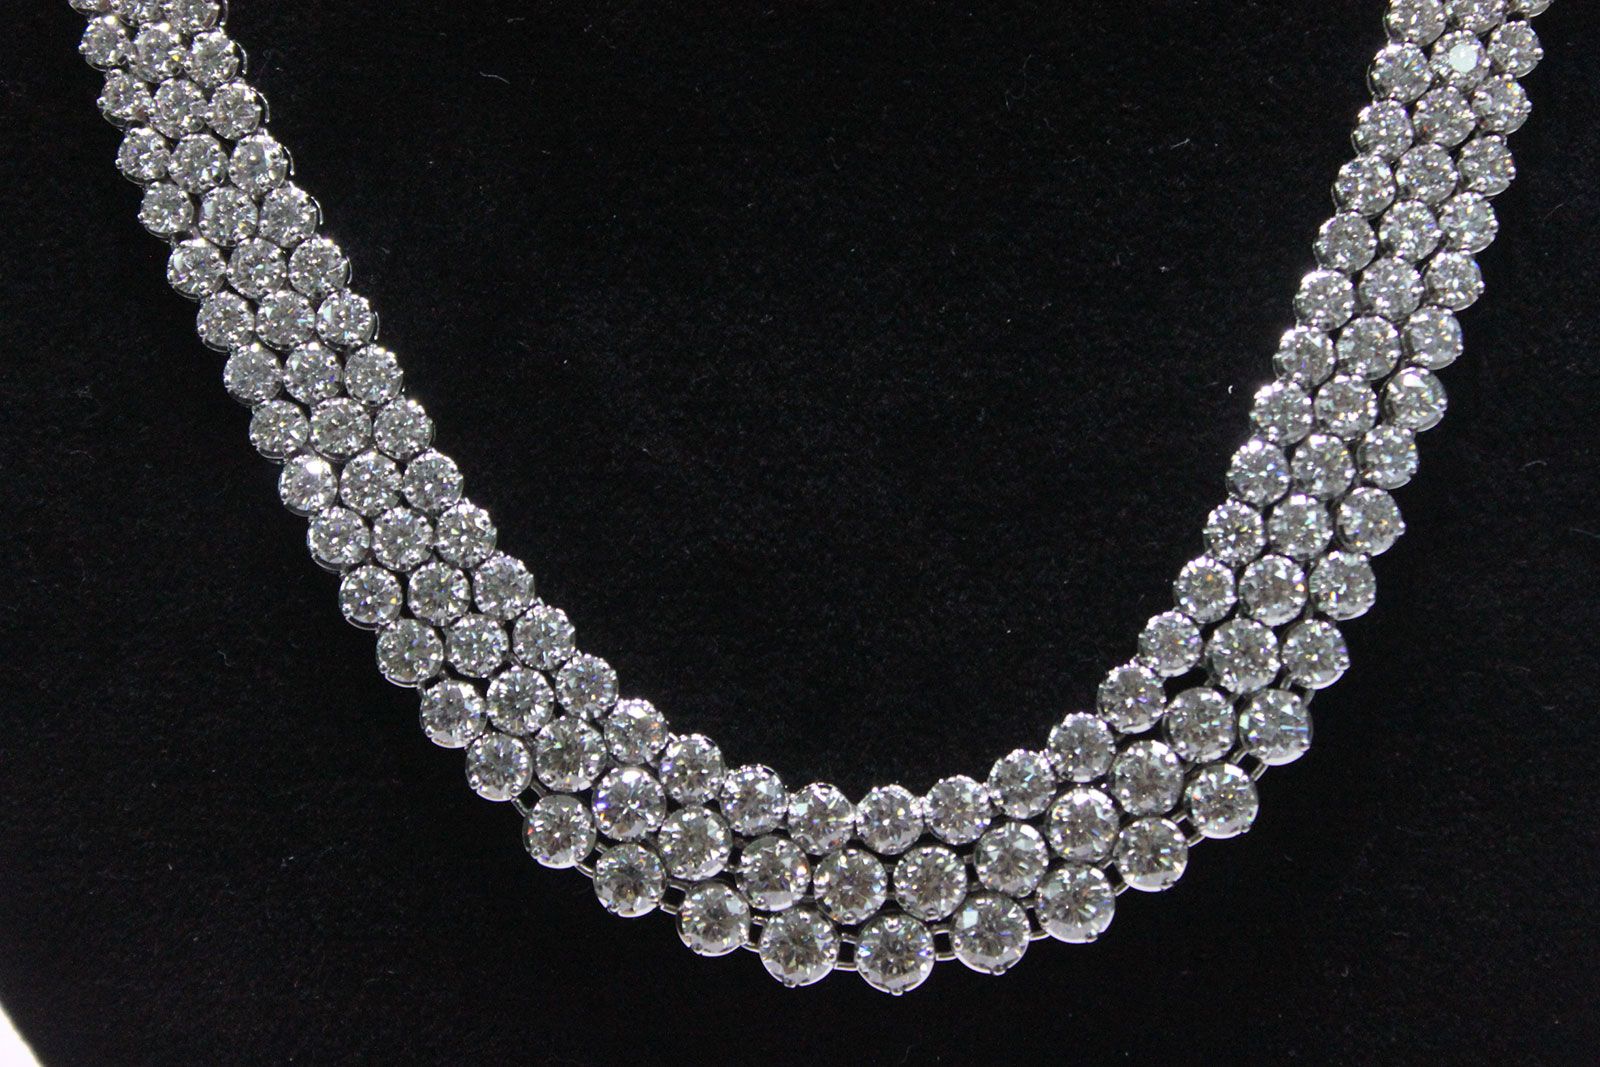 Free download 18K Handcrafted Diamond Necklace with 5000 Carat Total Diamond [1600x1067] for your Desktop, Mobile & Tablet. Explore Real Diamond Wallpaper. Real Diamond Wallpaper, Diamond Wallpaper, Diamond Wallpaper